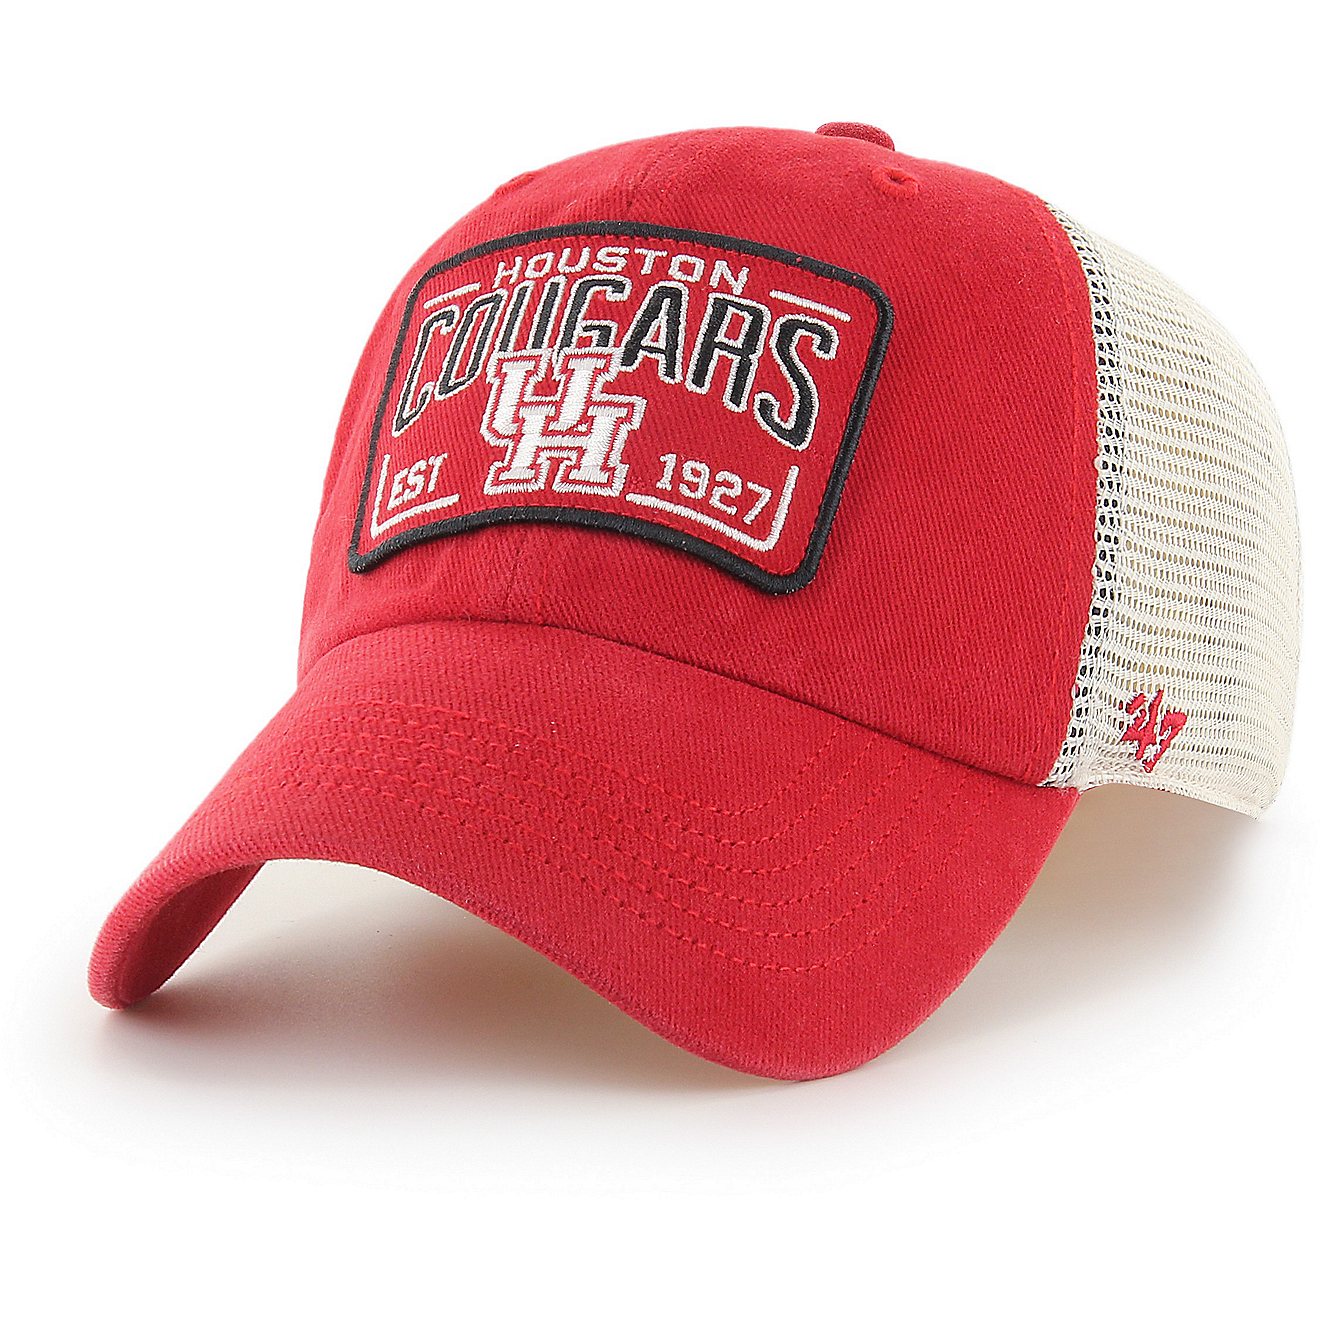 '47 Adults' University of Houston Macdermot Clean Up Cap                                                                         - view number 1